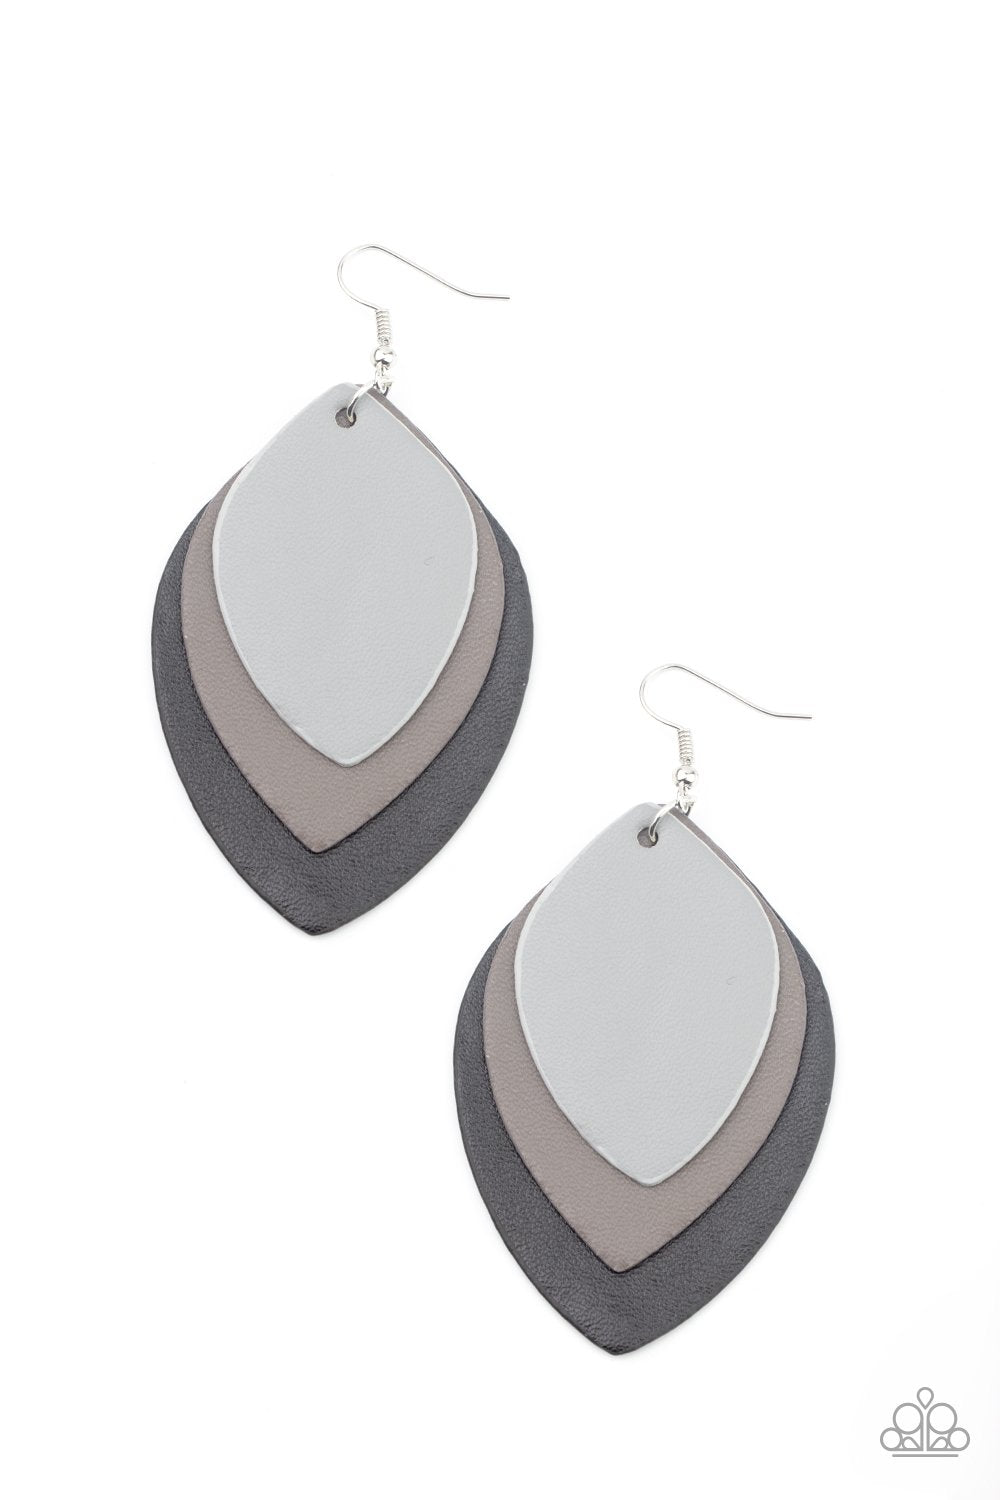 Light as a LEATHER Black Leather Earrings - Paparazzi Accessories - lightbox -CarasShop.com - $5 Jewelry by Cara Jewels